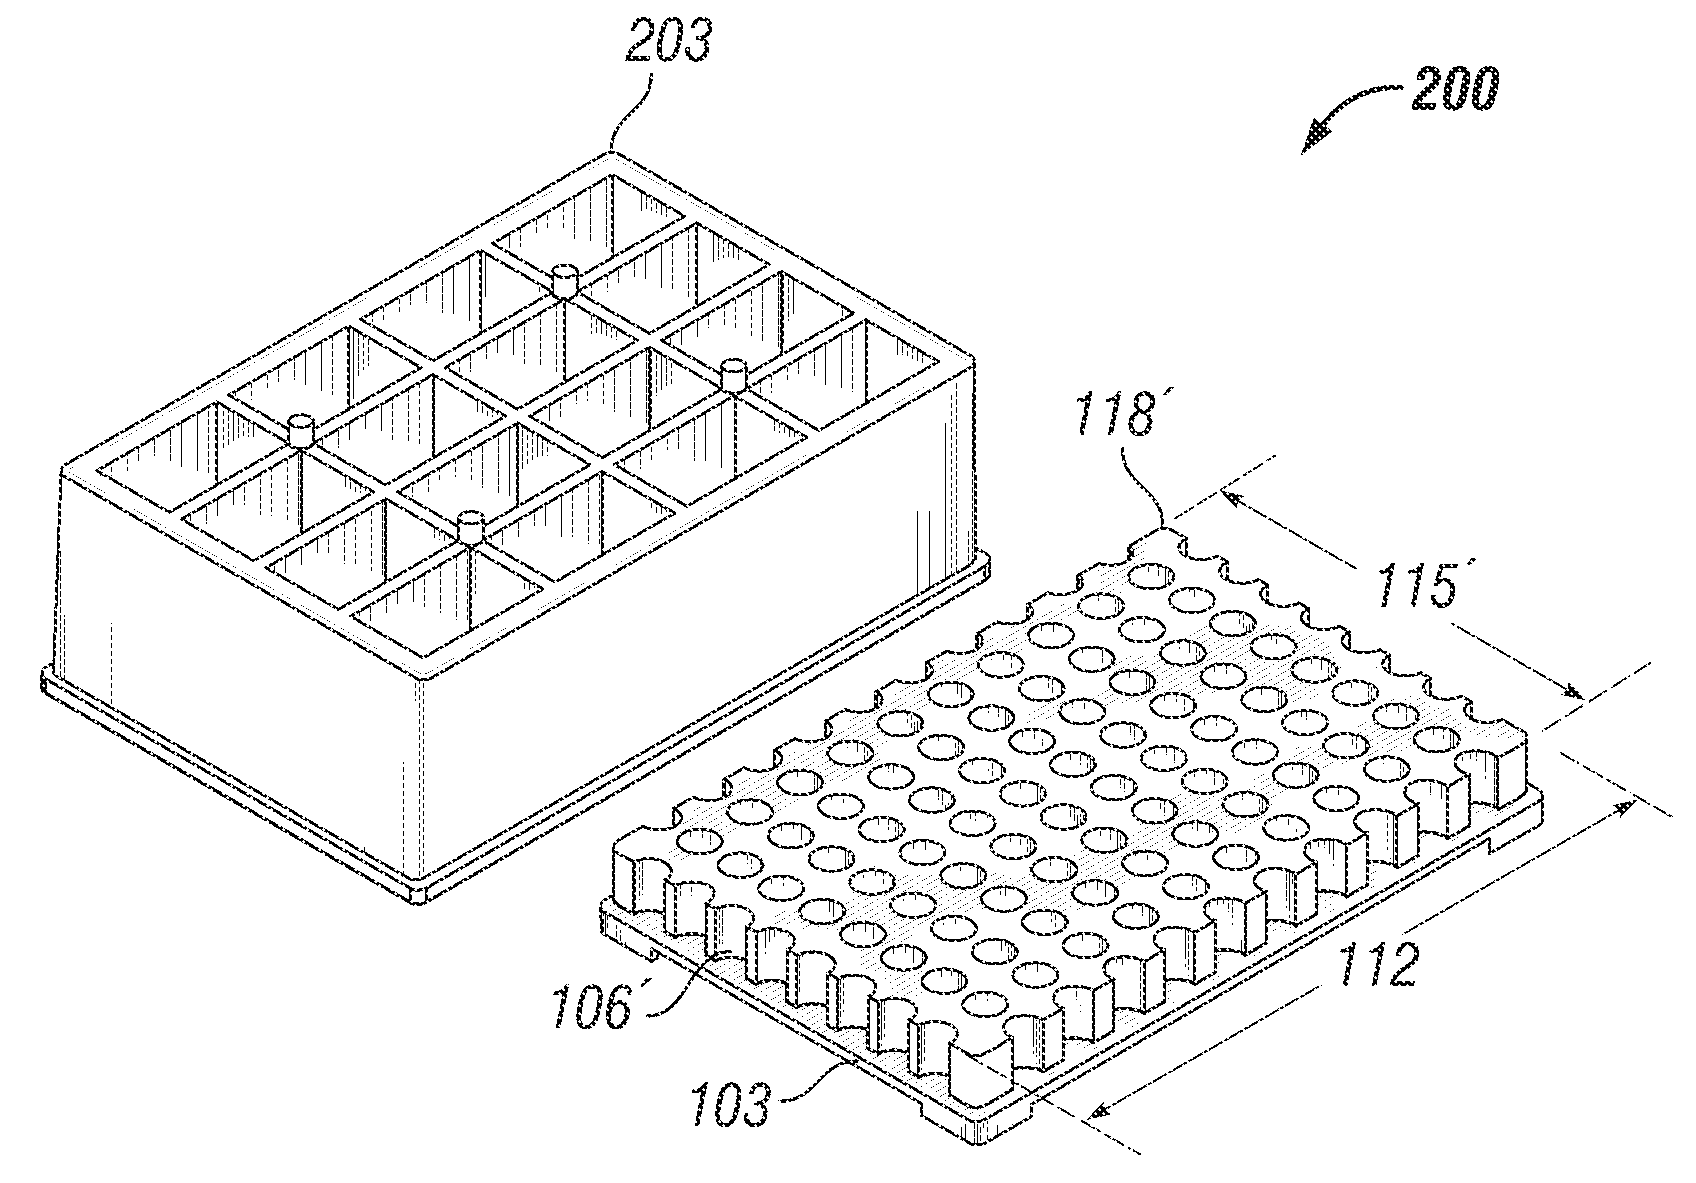 Microtitre plate with a relieved perimeter